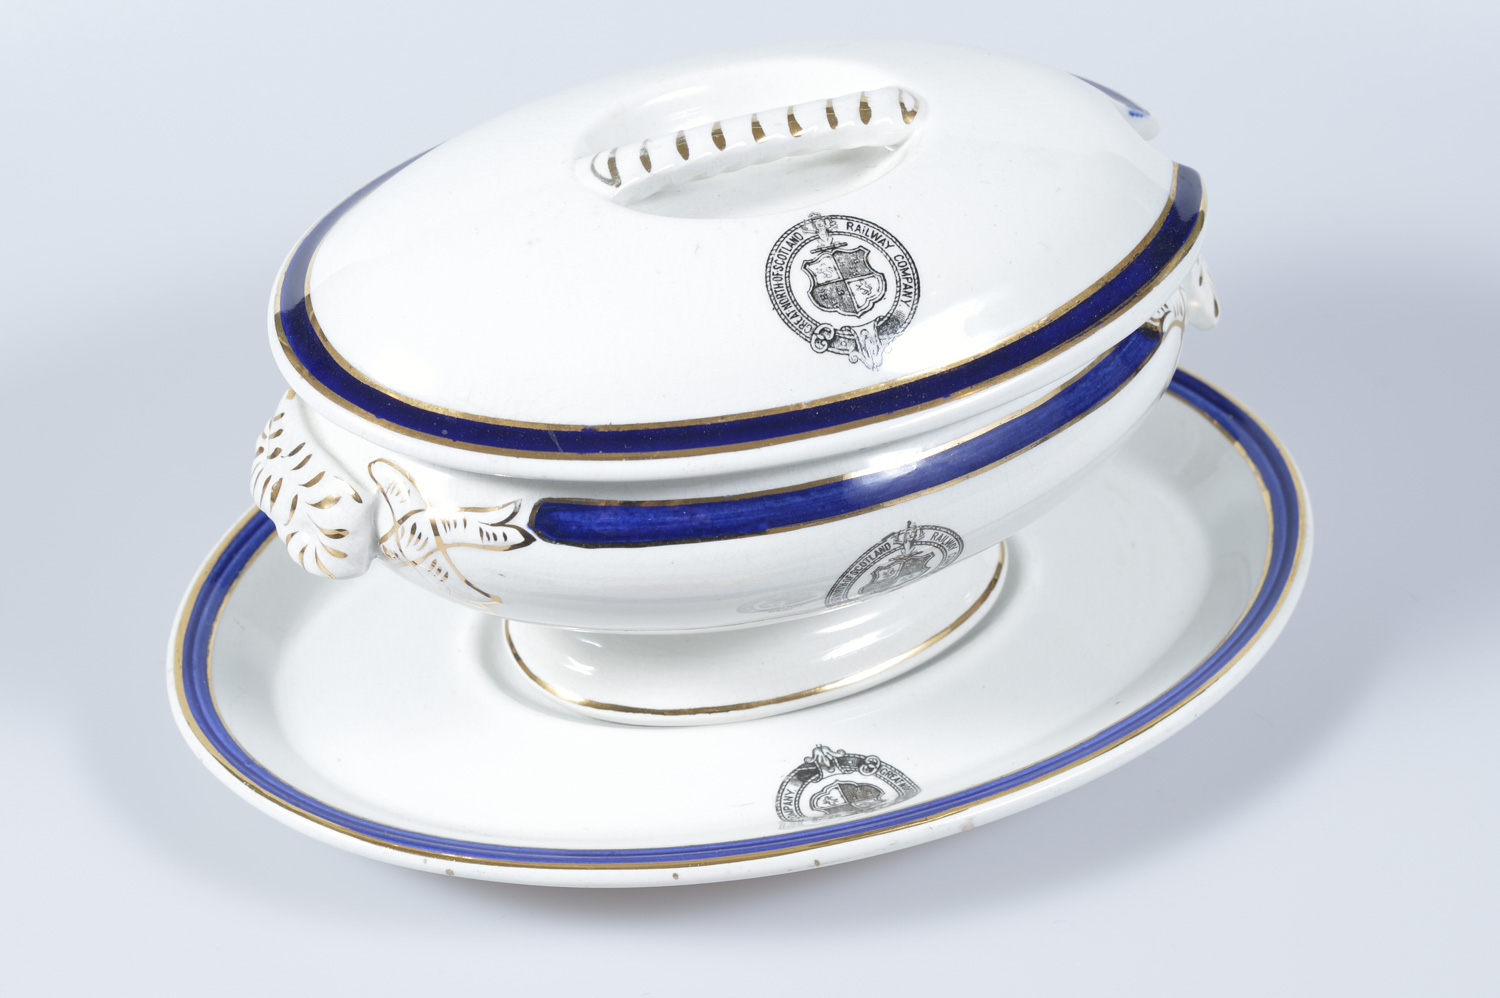 Ceramic tureen from the GNSR hotels